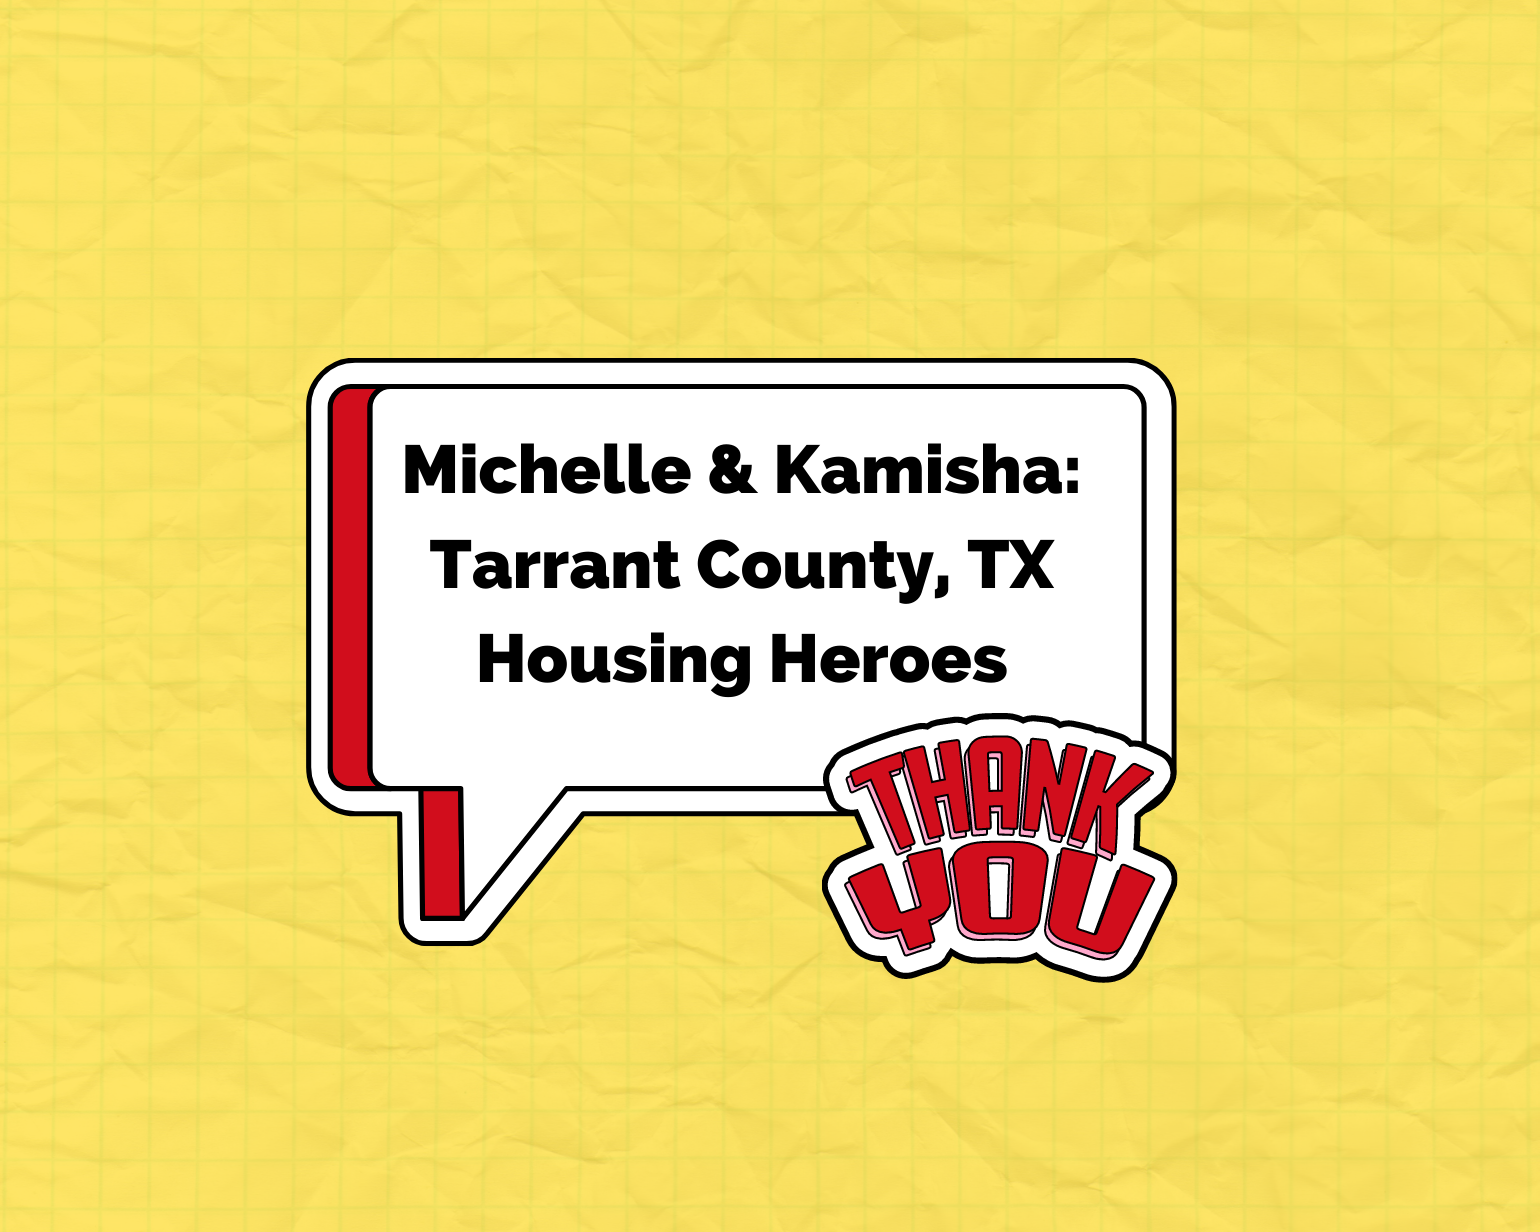 Speech bubble that says Michelle & Kamisha Tarrant County, TX Housing Heroes and a sticker that says Thank You